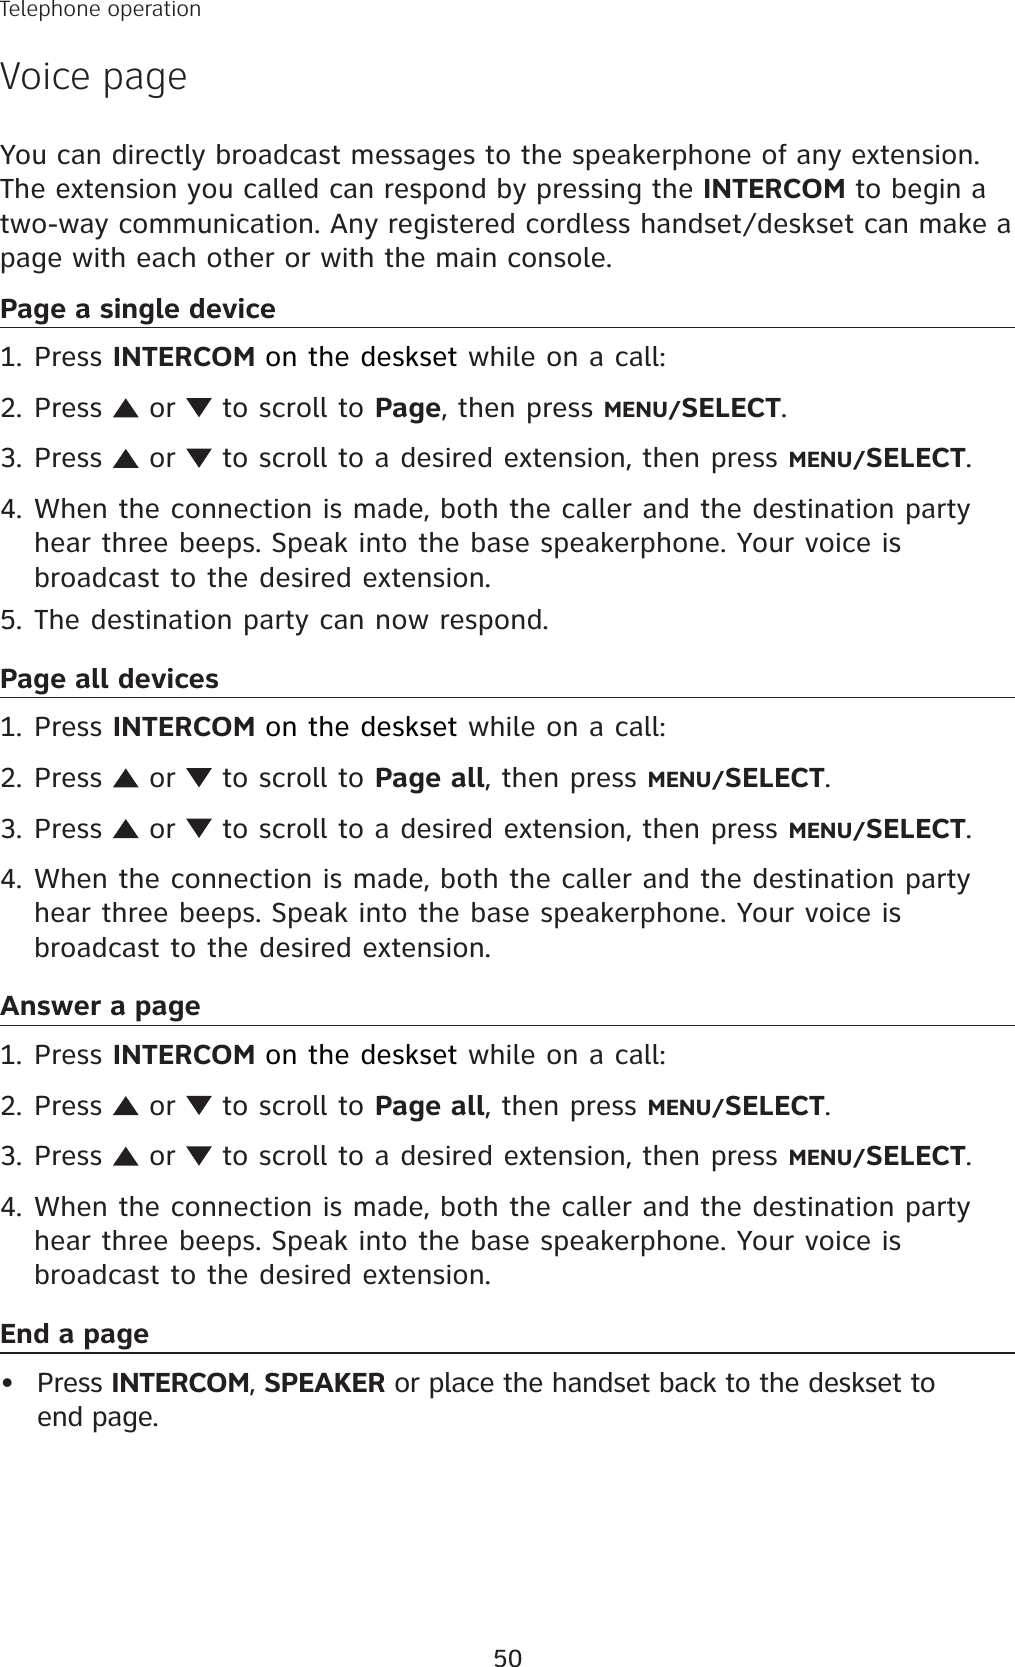 50You can directly broadcast messages to the speakerphone of any extension. The extension you called can respond by pressing the INTERCOM to begin a two-way communication. Any registered cordless handset/deskset can make a page with each other or with the main console. Page a single devicePress INTERCOM on the deskset while on a call:Press   or   to scroll to Page, then press MENU/SELECT.Press   or   to scroll to a desired extension, then press MENU/SELECT.When the connection is made, both the caller and the destination party hear three beeps. Speak into the base speakerphone. Your voice is broadcast to the desired extension. The destination party can now respond.Page all devicesPress INTERCOM on the deskset while on a call:Press   or   to scroll to Page all, then press MENU/SELECT.Press   or   to scroll to a desired extension, then press MENU/SELECT.When the connection is made, both the caller and the destination party hear three beeps. Speak into the base speakerphone. Your voice is broadcast to the desired extension. Answer a pagePress INTERCOM on the deskset while on a call:Press   or   to scroll to Page all, then press MENU/SELECT.Press   or   to scroll to a desired extension, then press MENU/SELECT.When the connection is made, both the caller and the destination party hear three beeps. Speak into the base speakerphone. Your voice is broadcast to the desired extension. End a page Press INTERCOM, SPEAKER or place the handset back to the deskset to end page.1.2.3.4.5.1.2.3.4.1.2.3.4.•Telephone operationVoice page